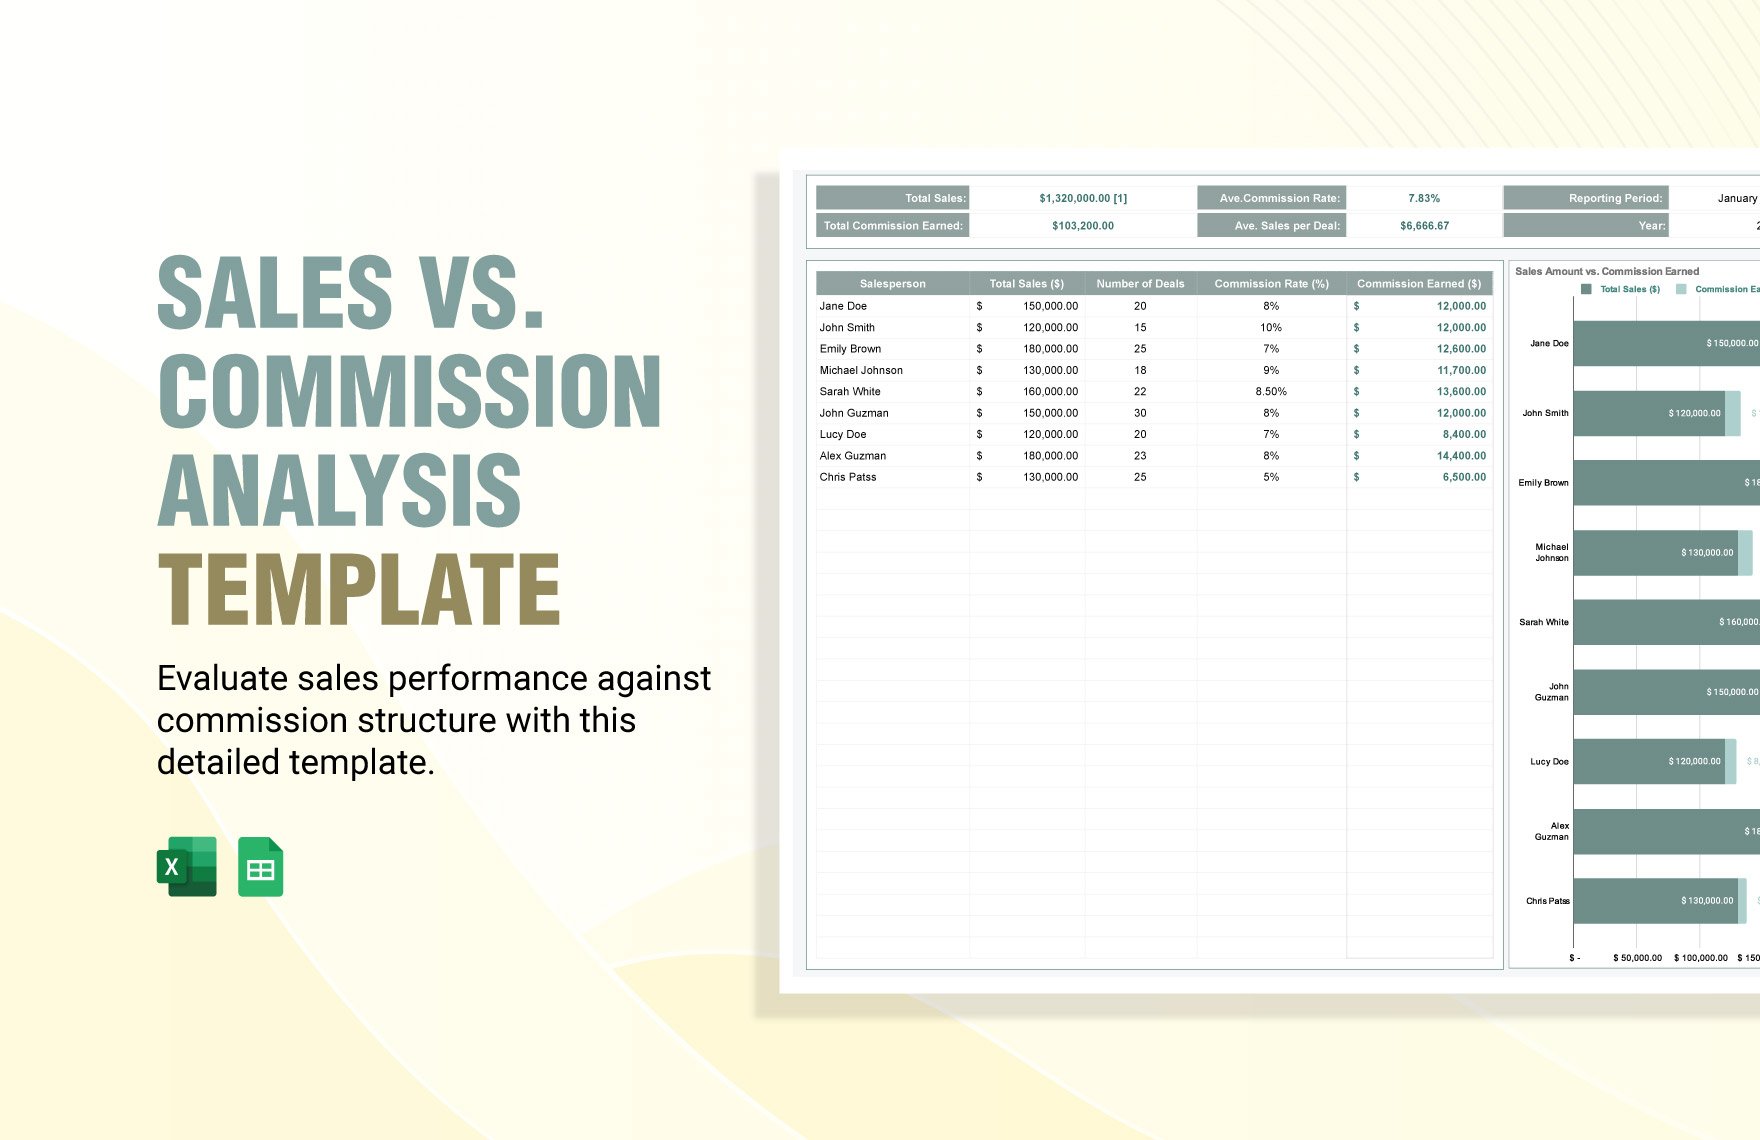 Sales vs. Commission Analysis Template